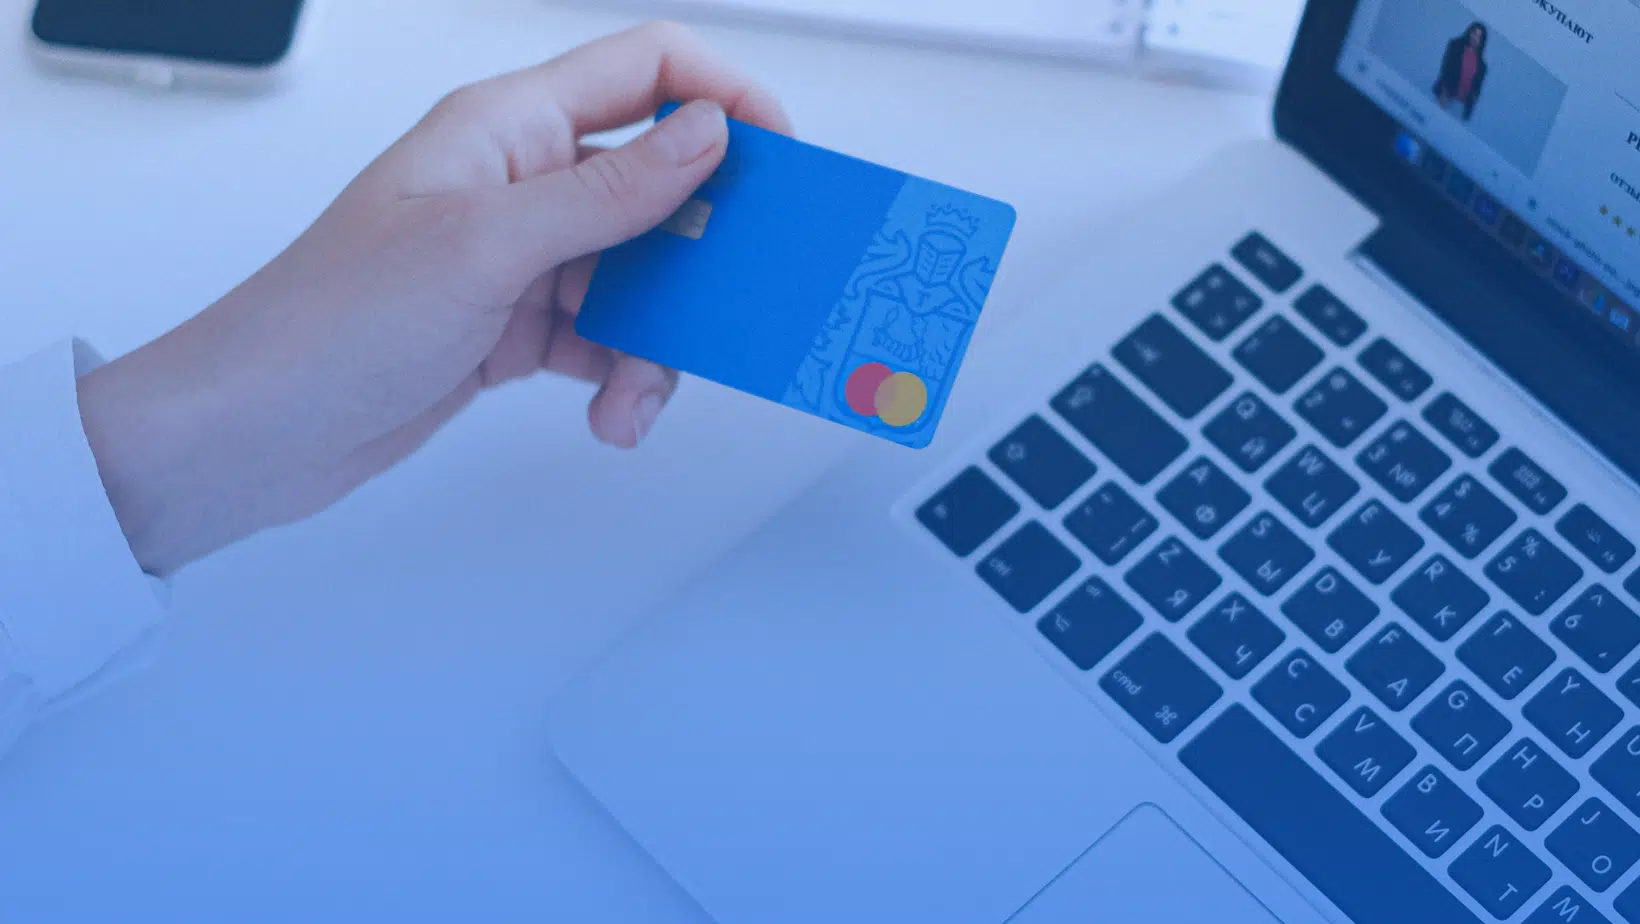 4 Reasons Payment Service Providers Should Care About Their Approach to Fraud